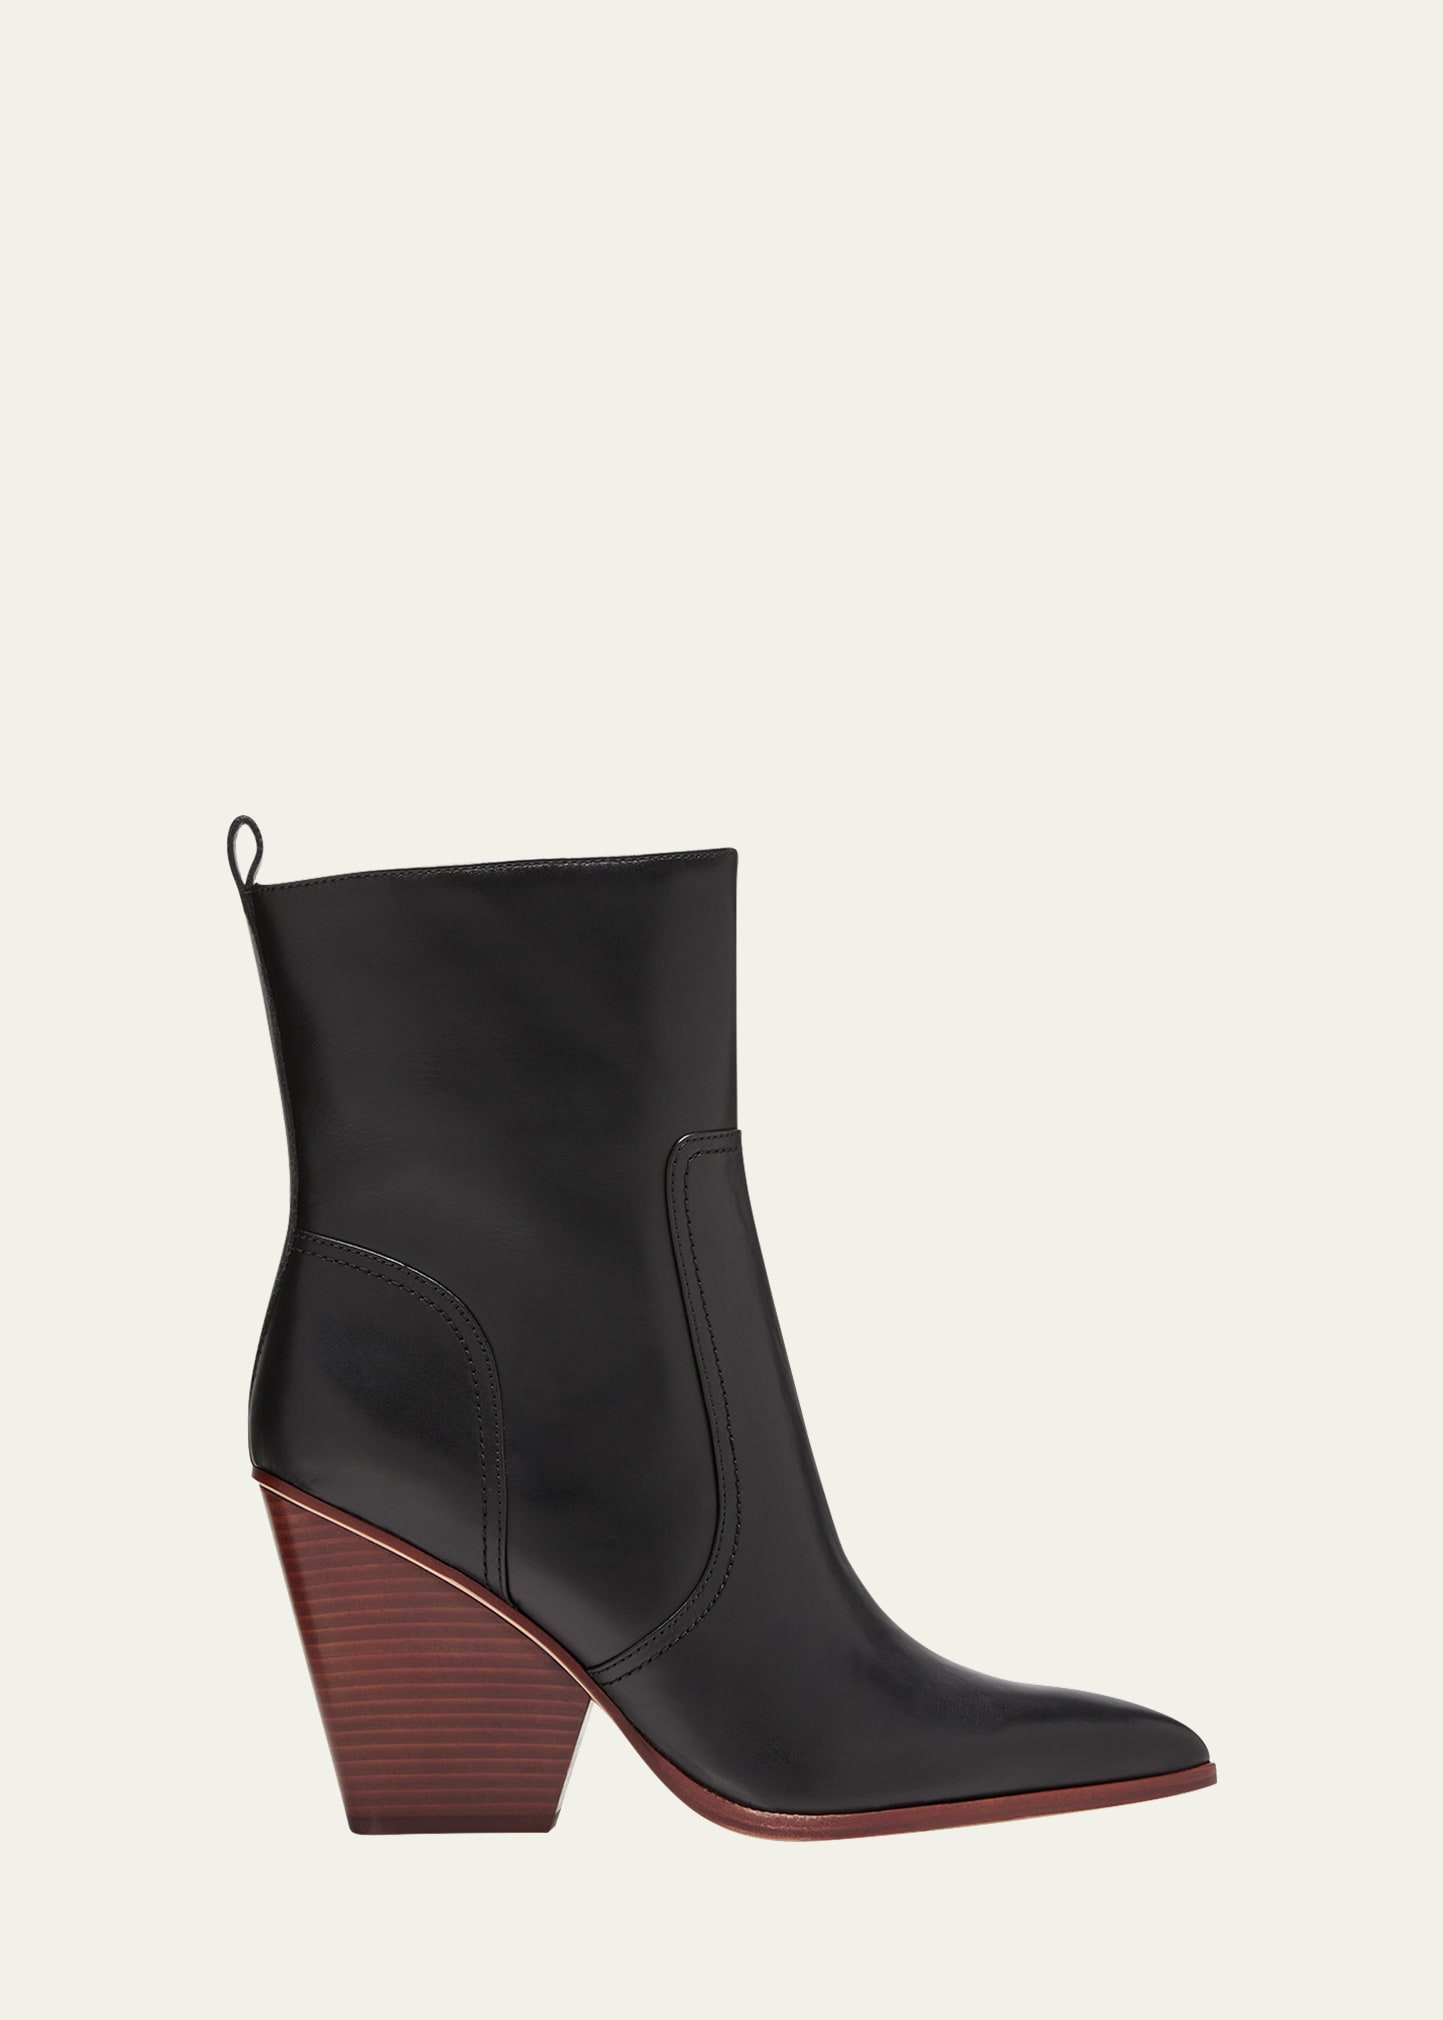 Veronica Beard Logan Leather Ankle Boots In Black